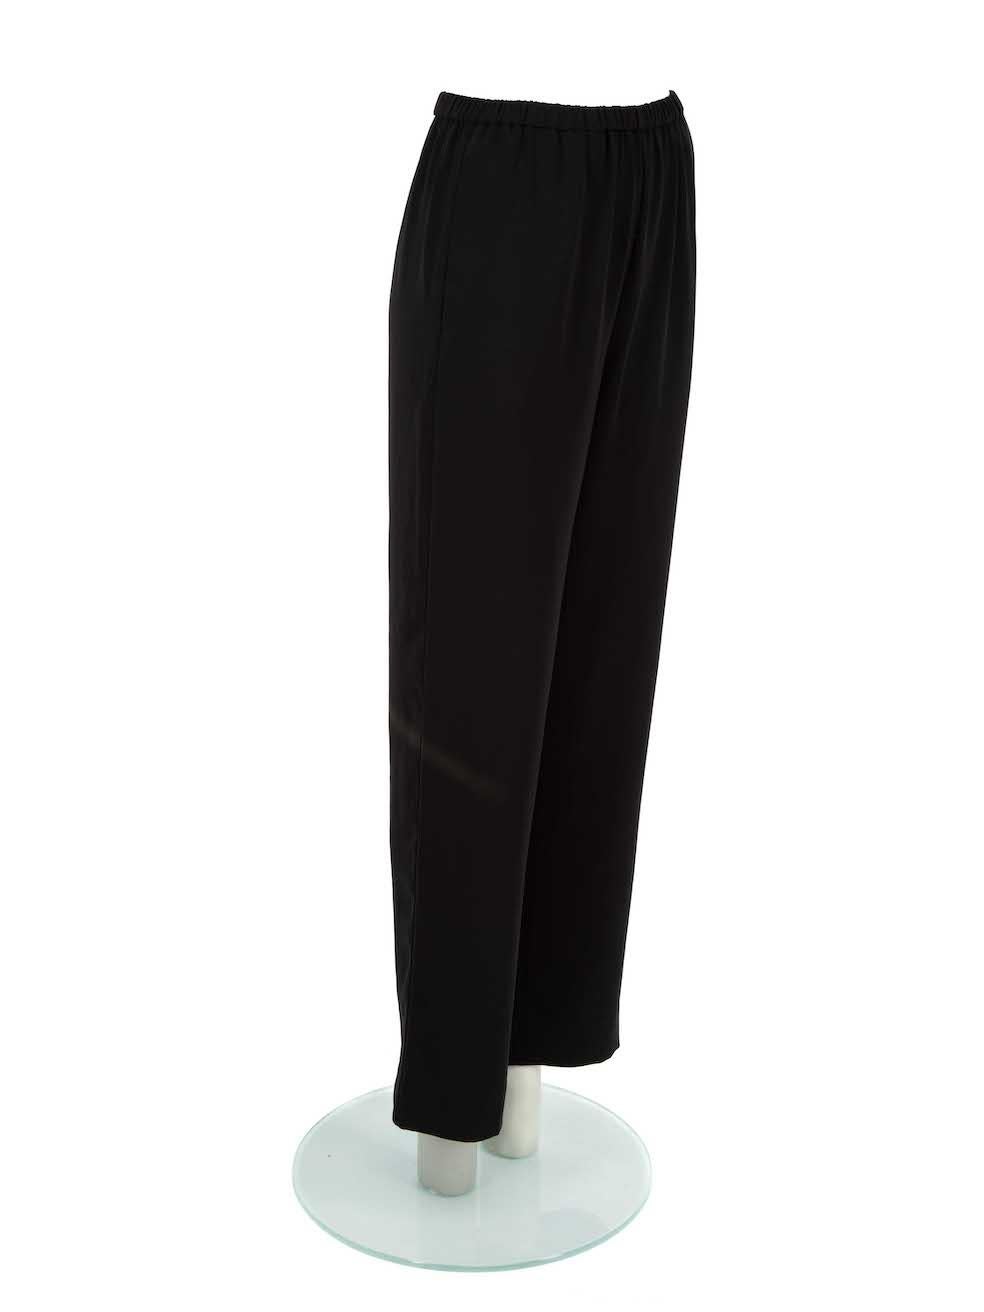 CONDITION is Very good. Minimal wear to trousers is evident. Minimal wear to the front with small pluck to the weave on this used Totême designer resale item.
 
Details
Black
Polyester
Trousers
Straight fit
Elasticated waistband
2x Side pockets
Mid